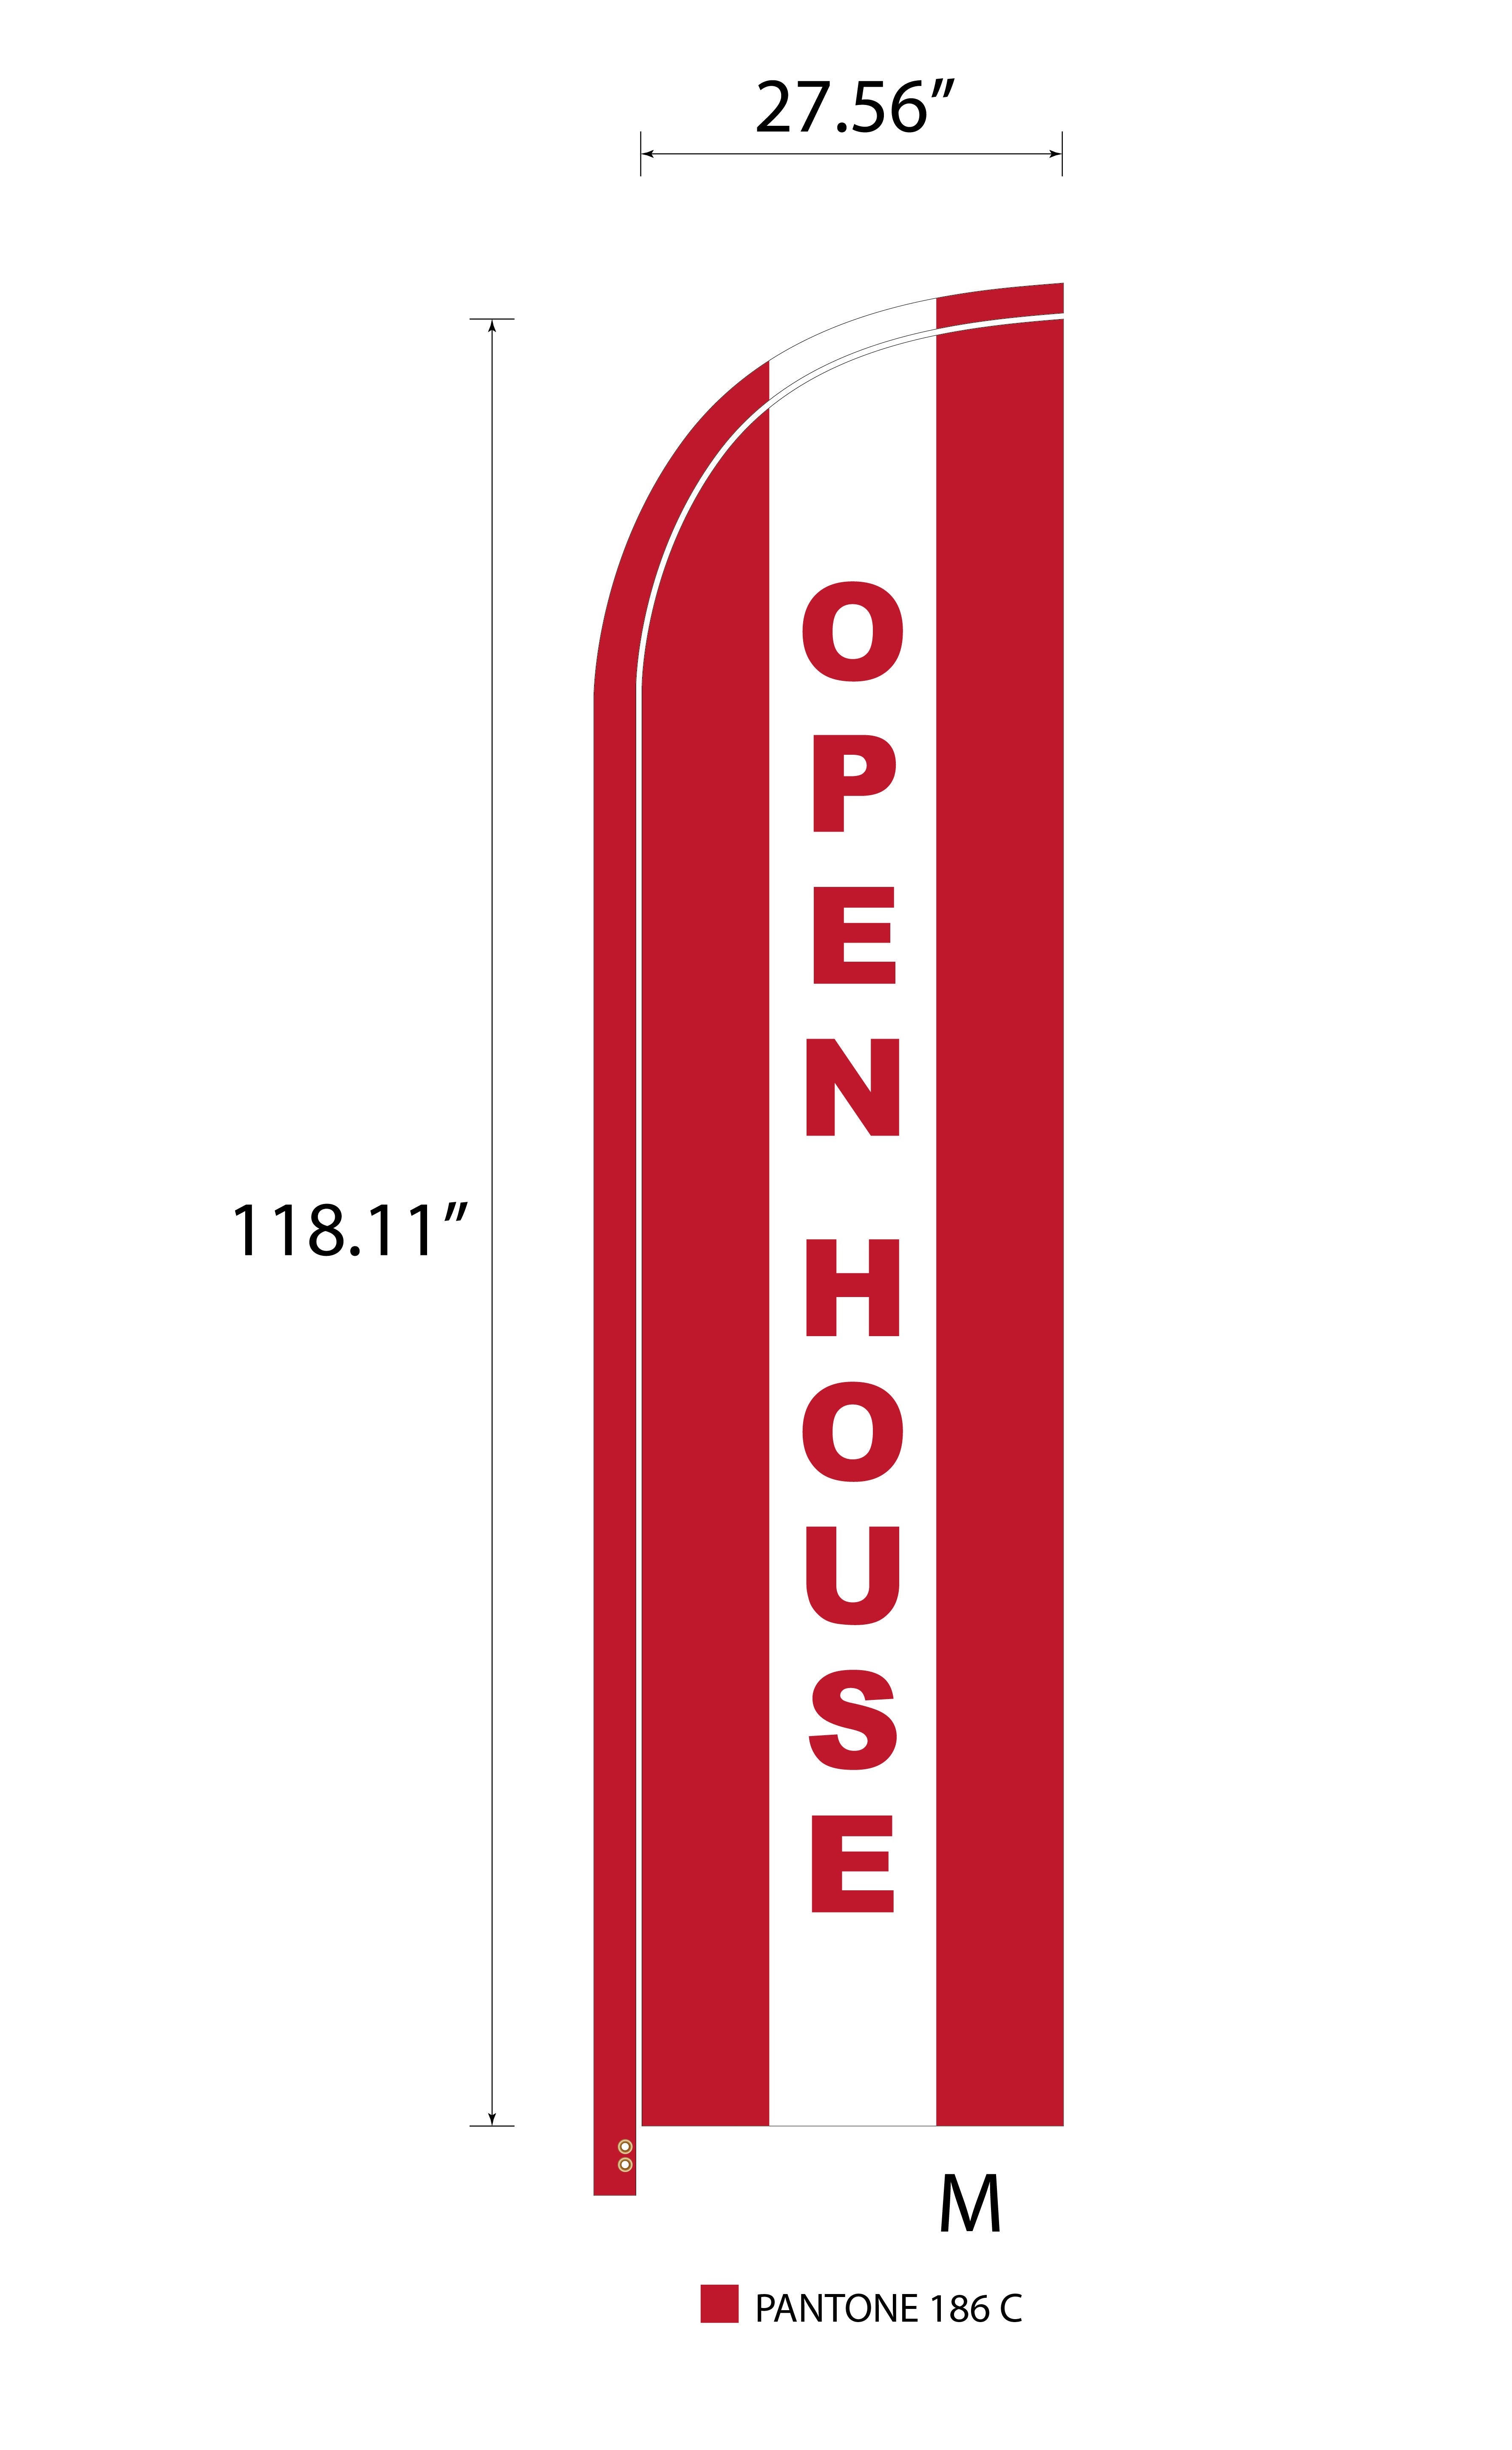 Rausch Coleman Homes OPEN HOUSE Medium 11' Deluxe Blade Sail Flag Complete Set - SINGLE-SIDED - Flag and Pole Kit with Spike and Carry Bag